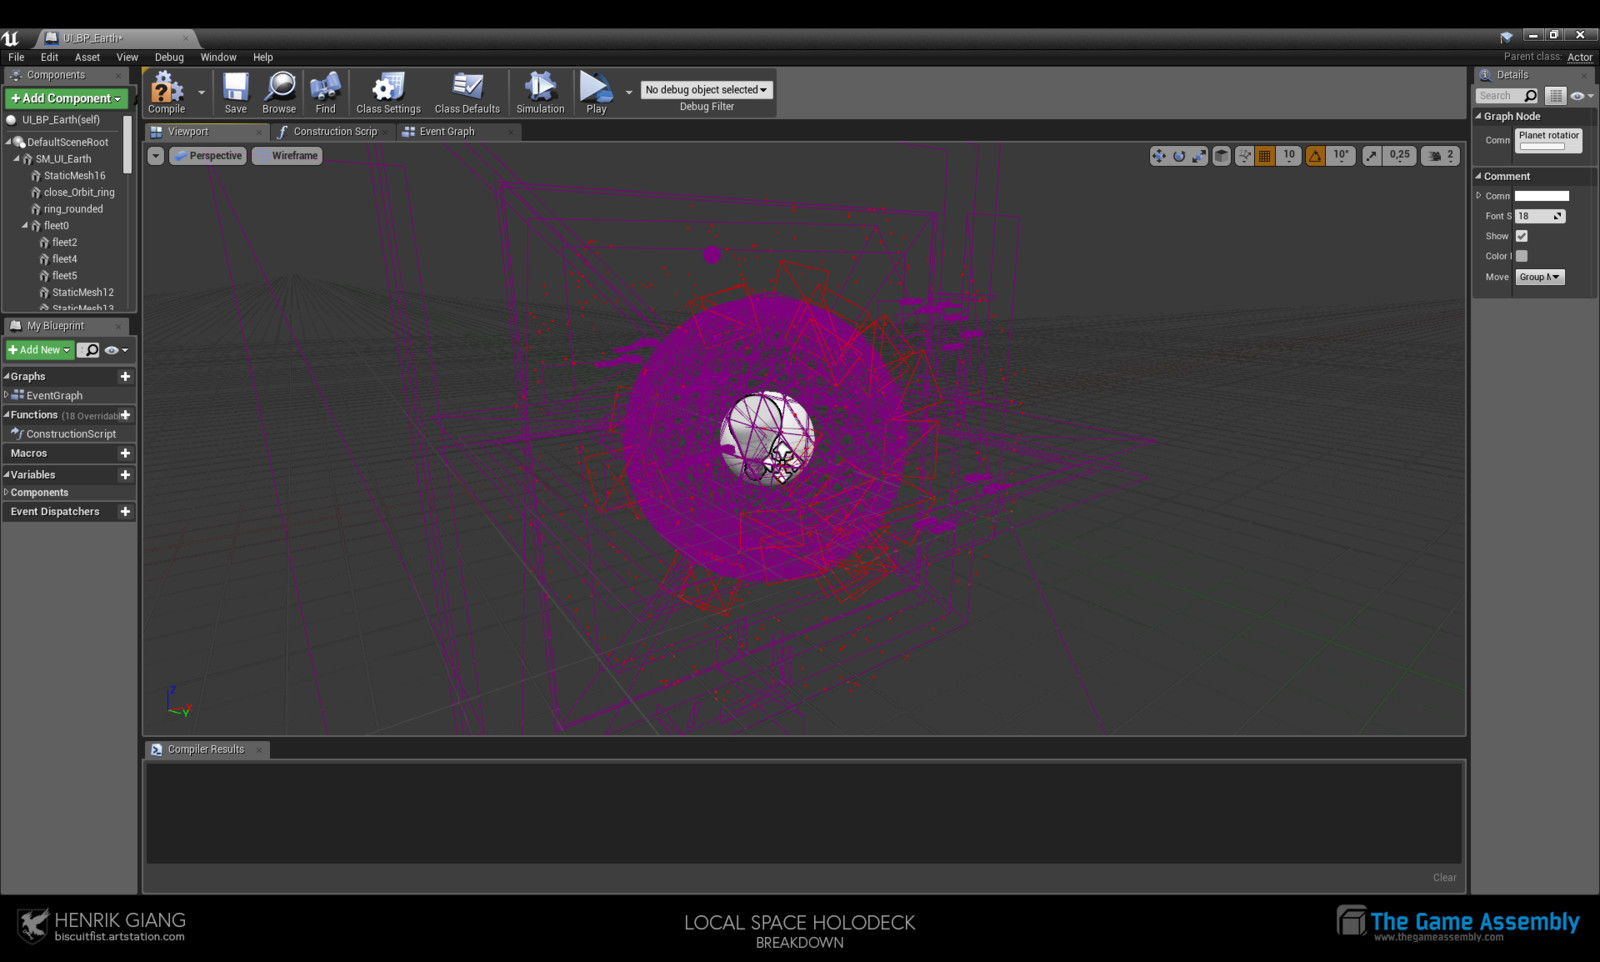 Wireframe view.